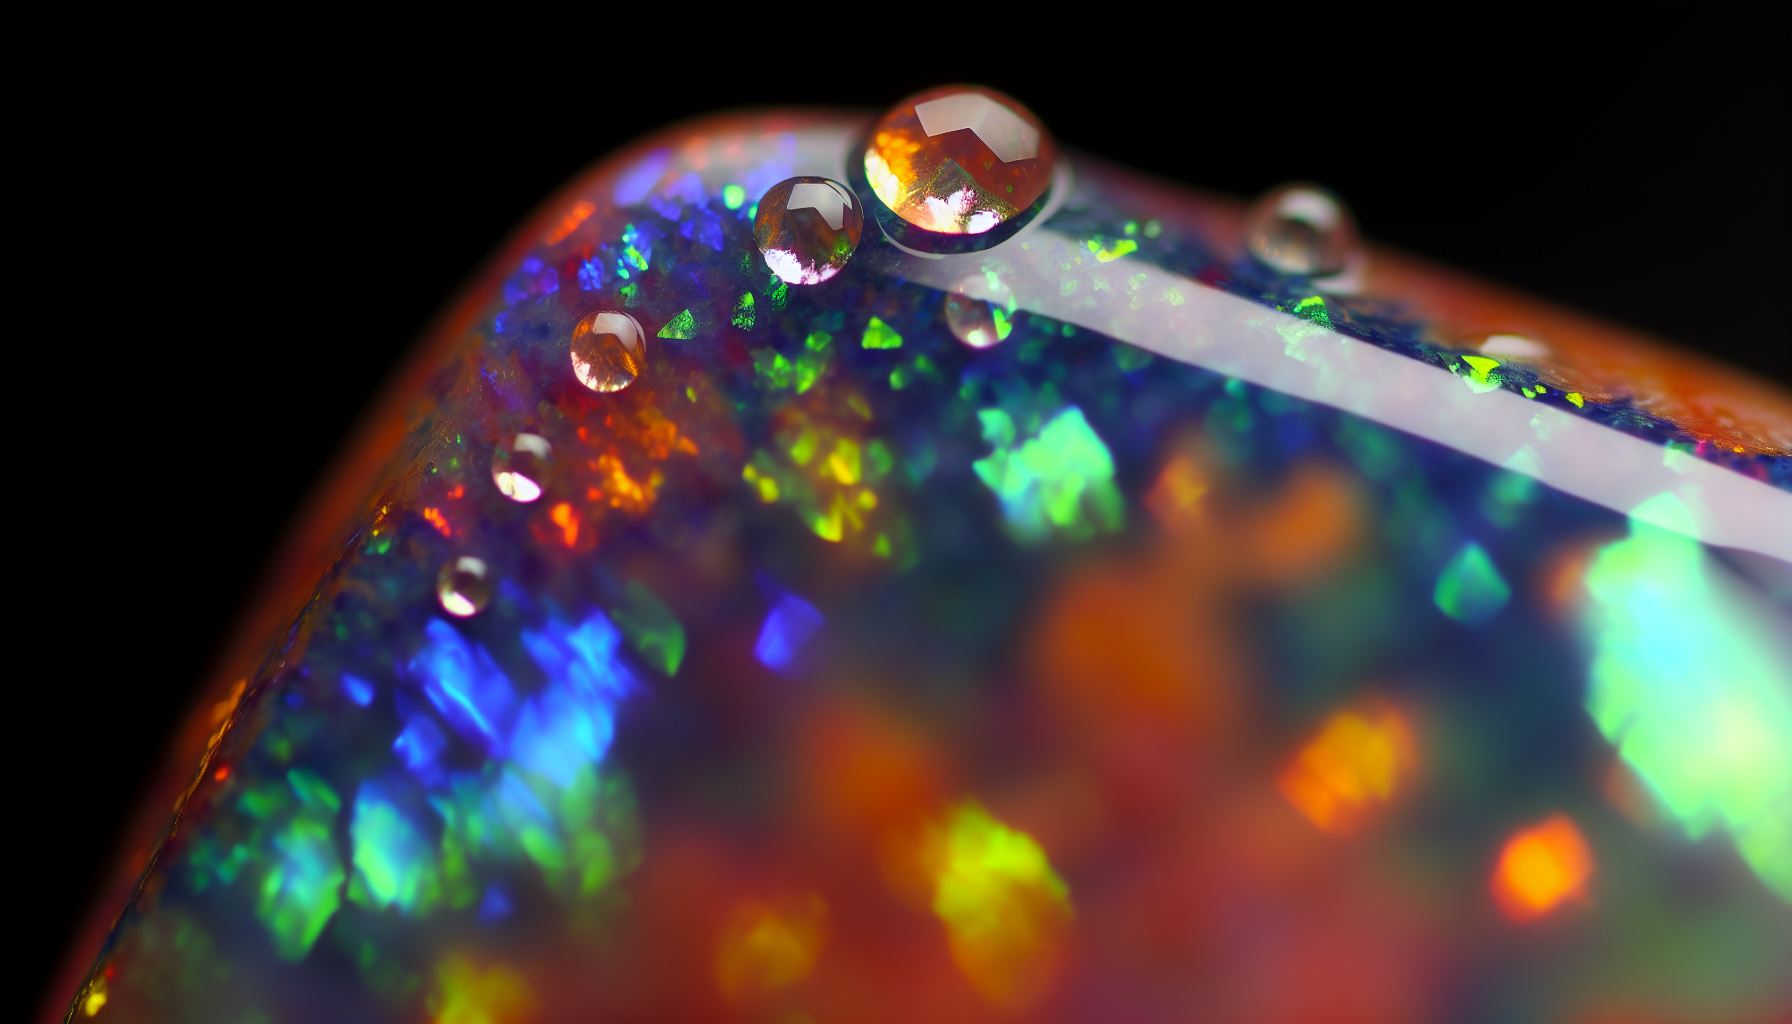 Opal with water droplets showcasing its high water content